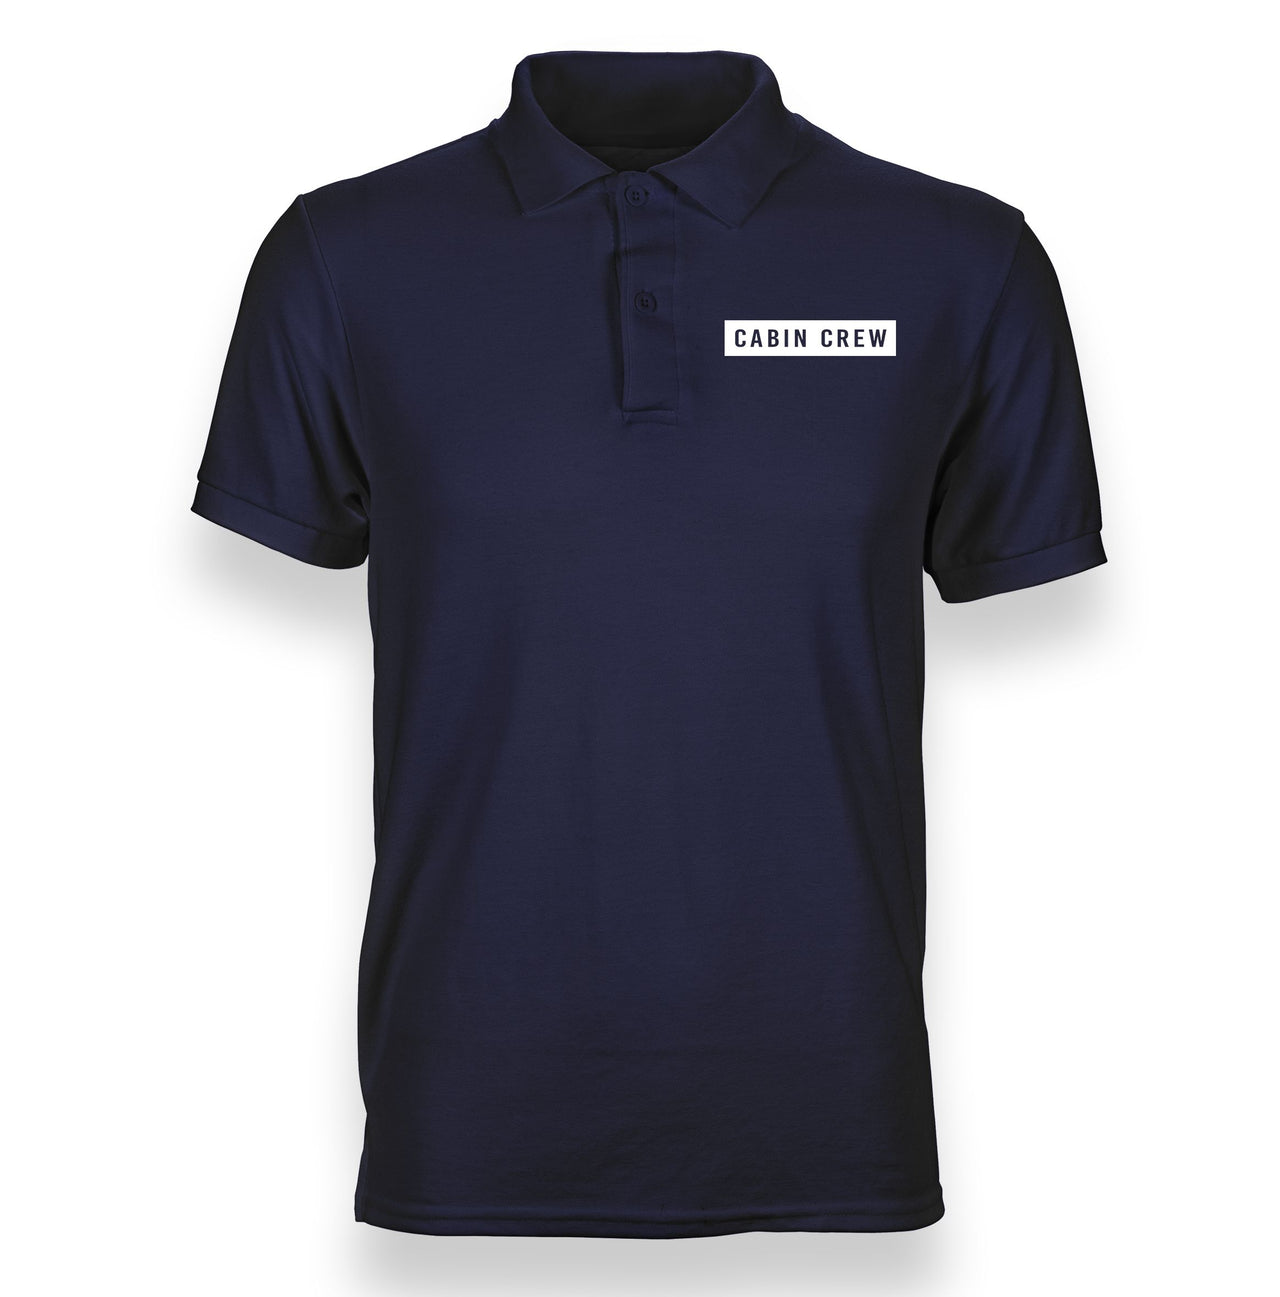 Cabin Crew Text Designed Polo T-Shirts